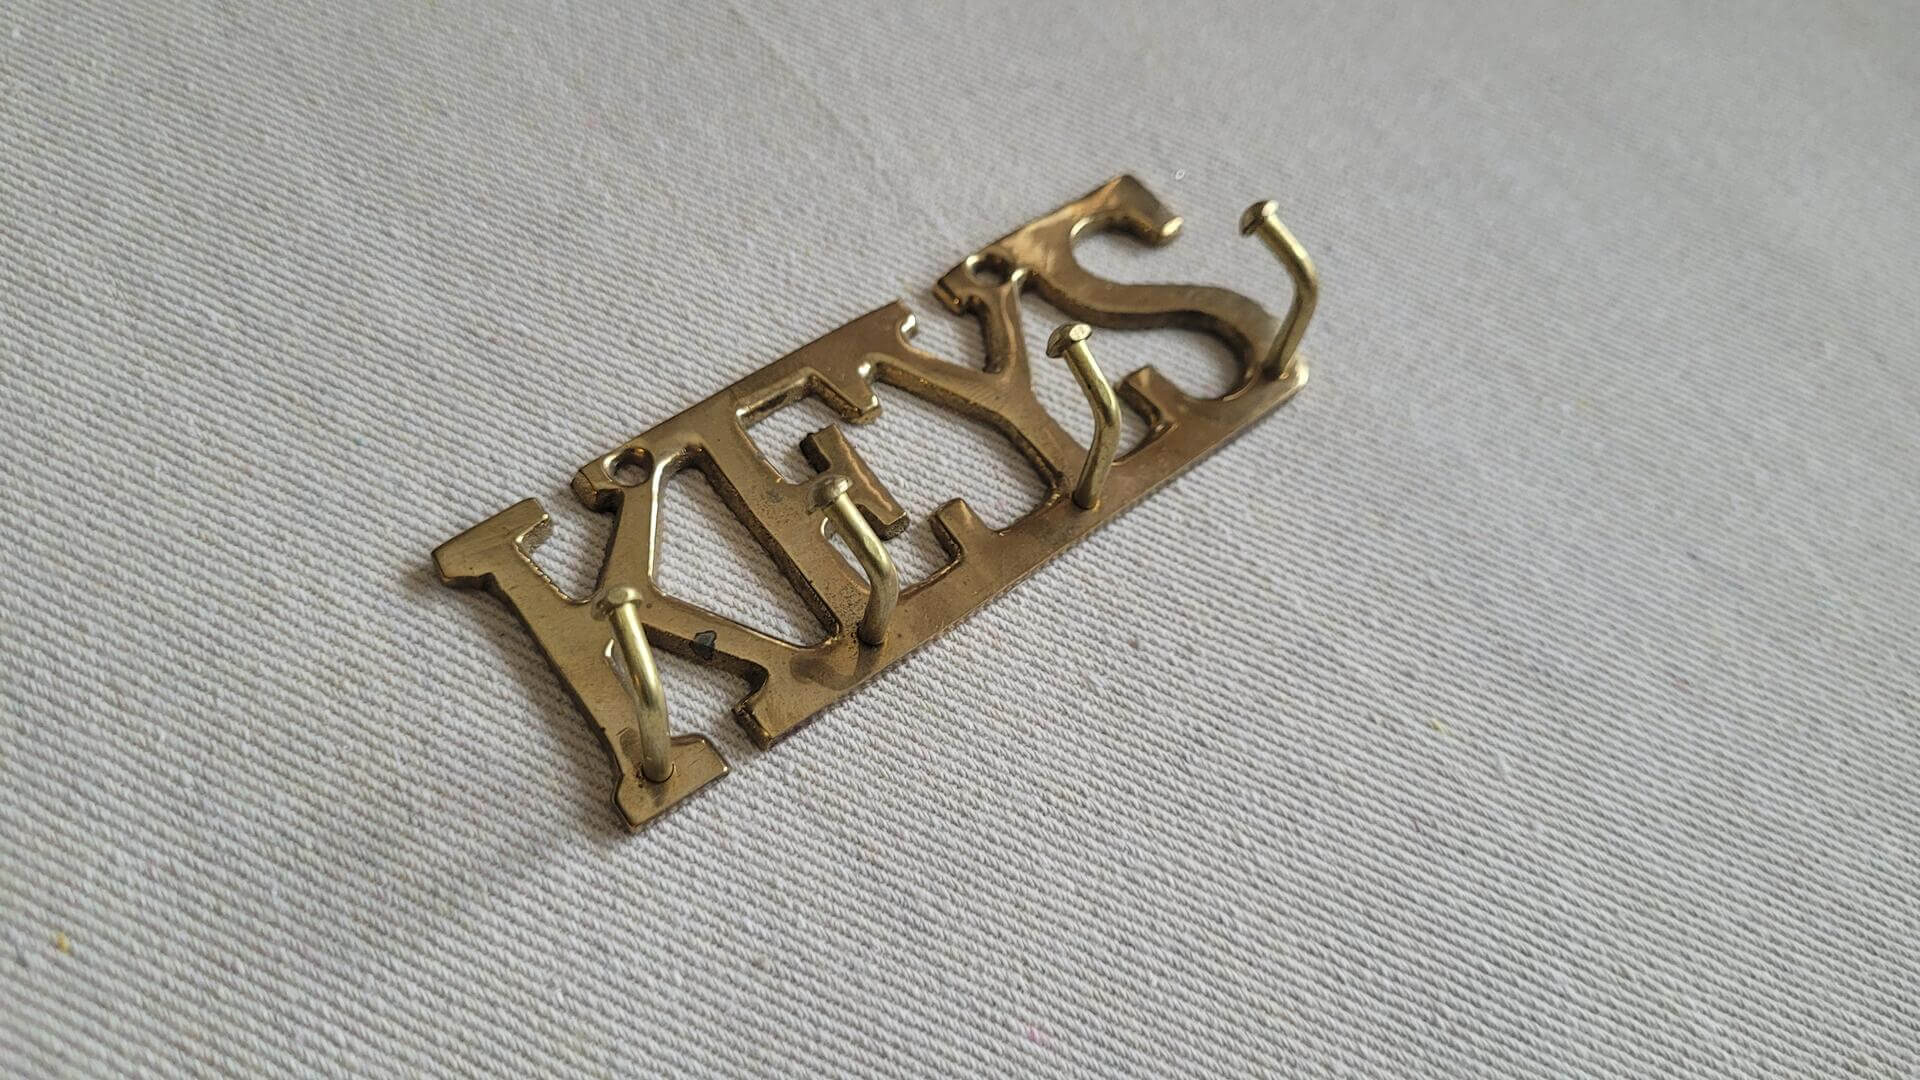 Vintage solid brass wall mount “KEYS” keyhook with holes for screws and 4 hooks to hang keys on. Retro collectible wall decor and house decorative accessories